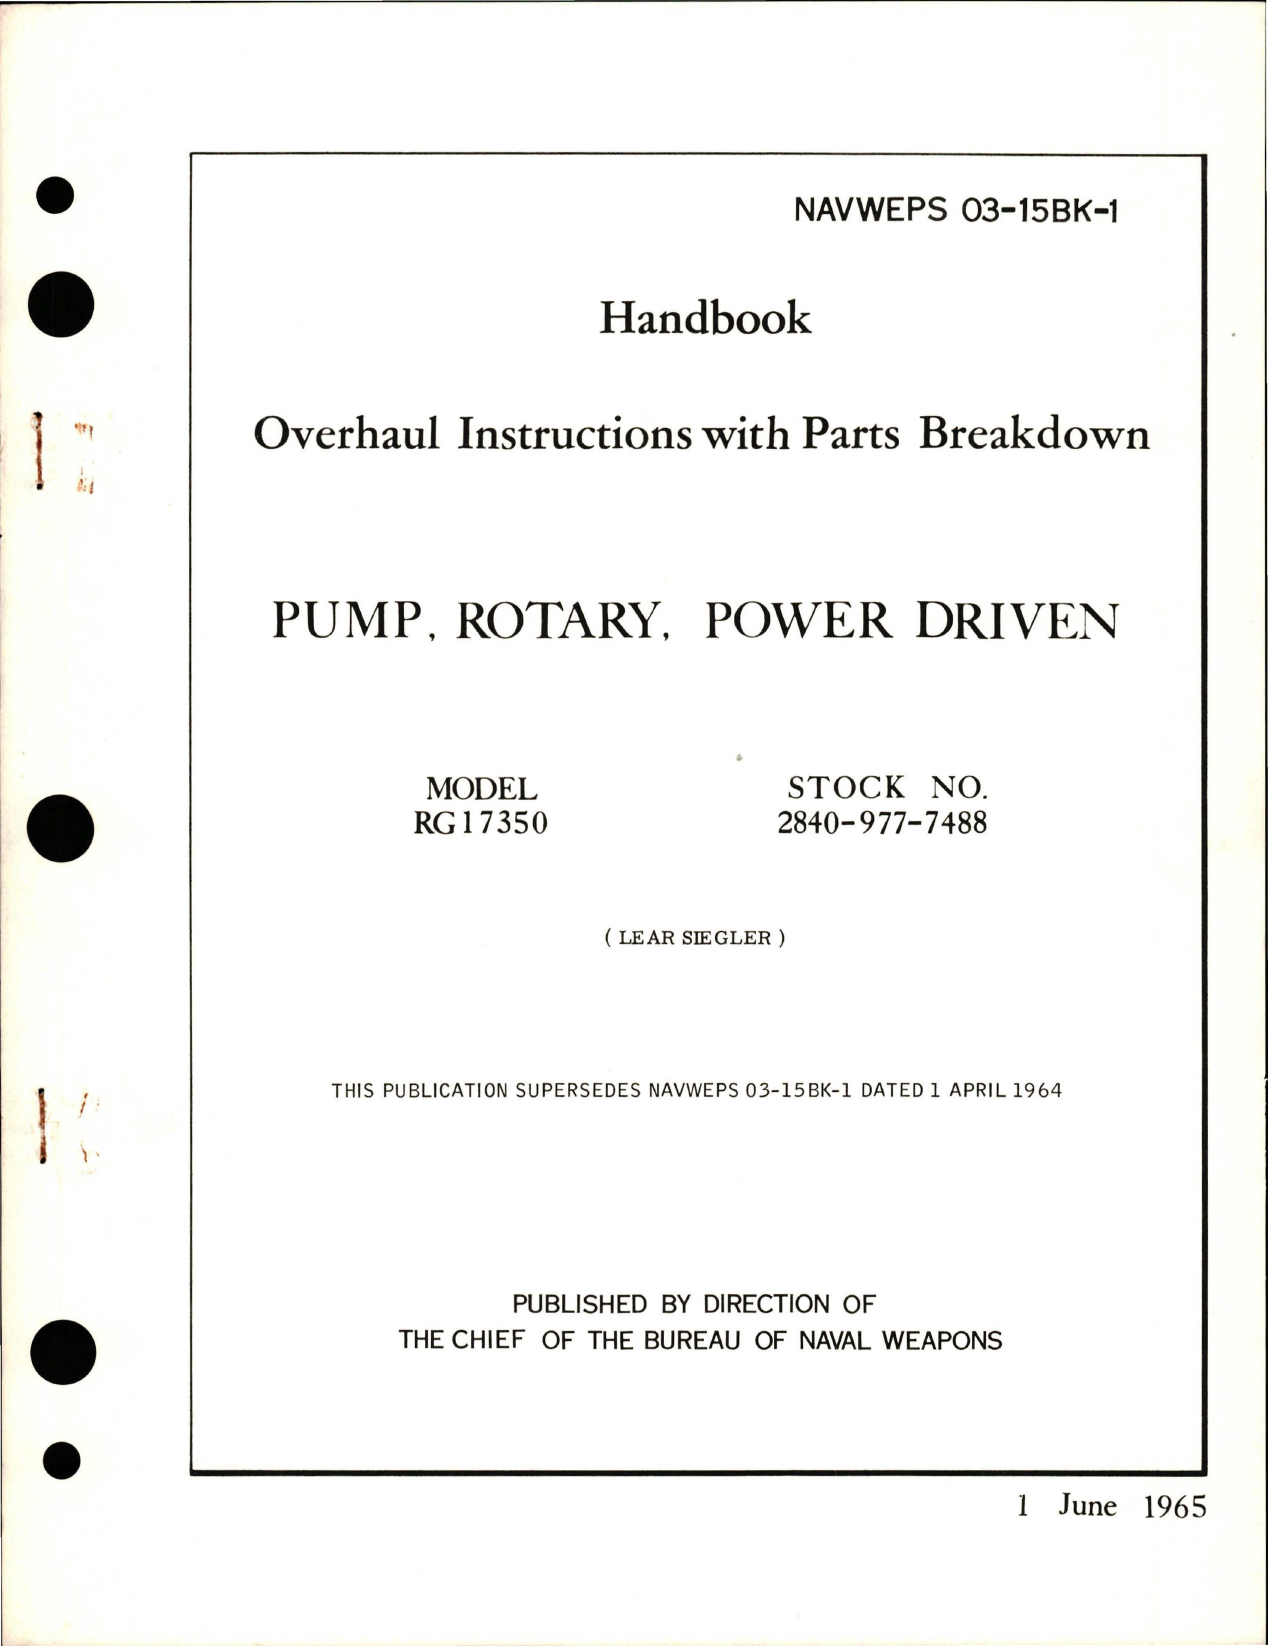 Sample page 1 from AirCorps Library document: Overhaul Instructions with Parts Breakdown for Power Driven Rotary Pump - Model RG17350